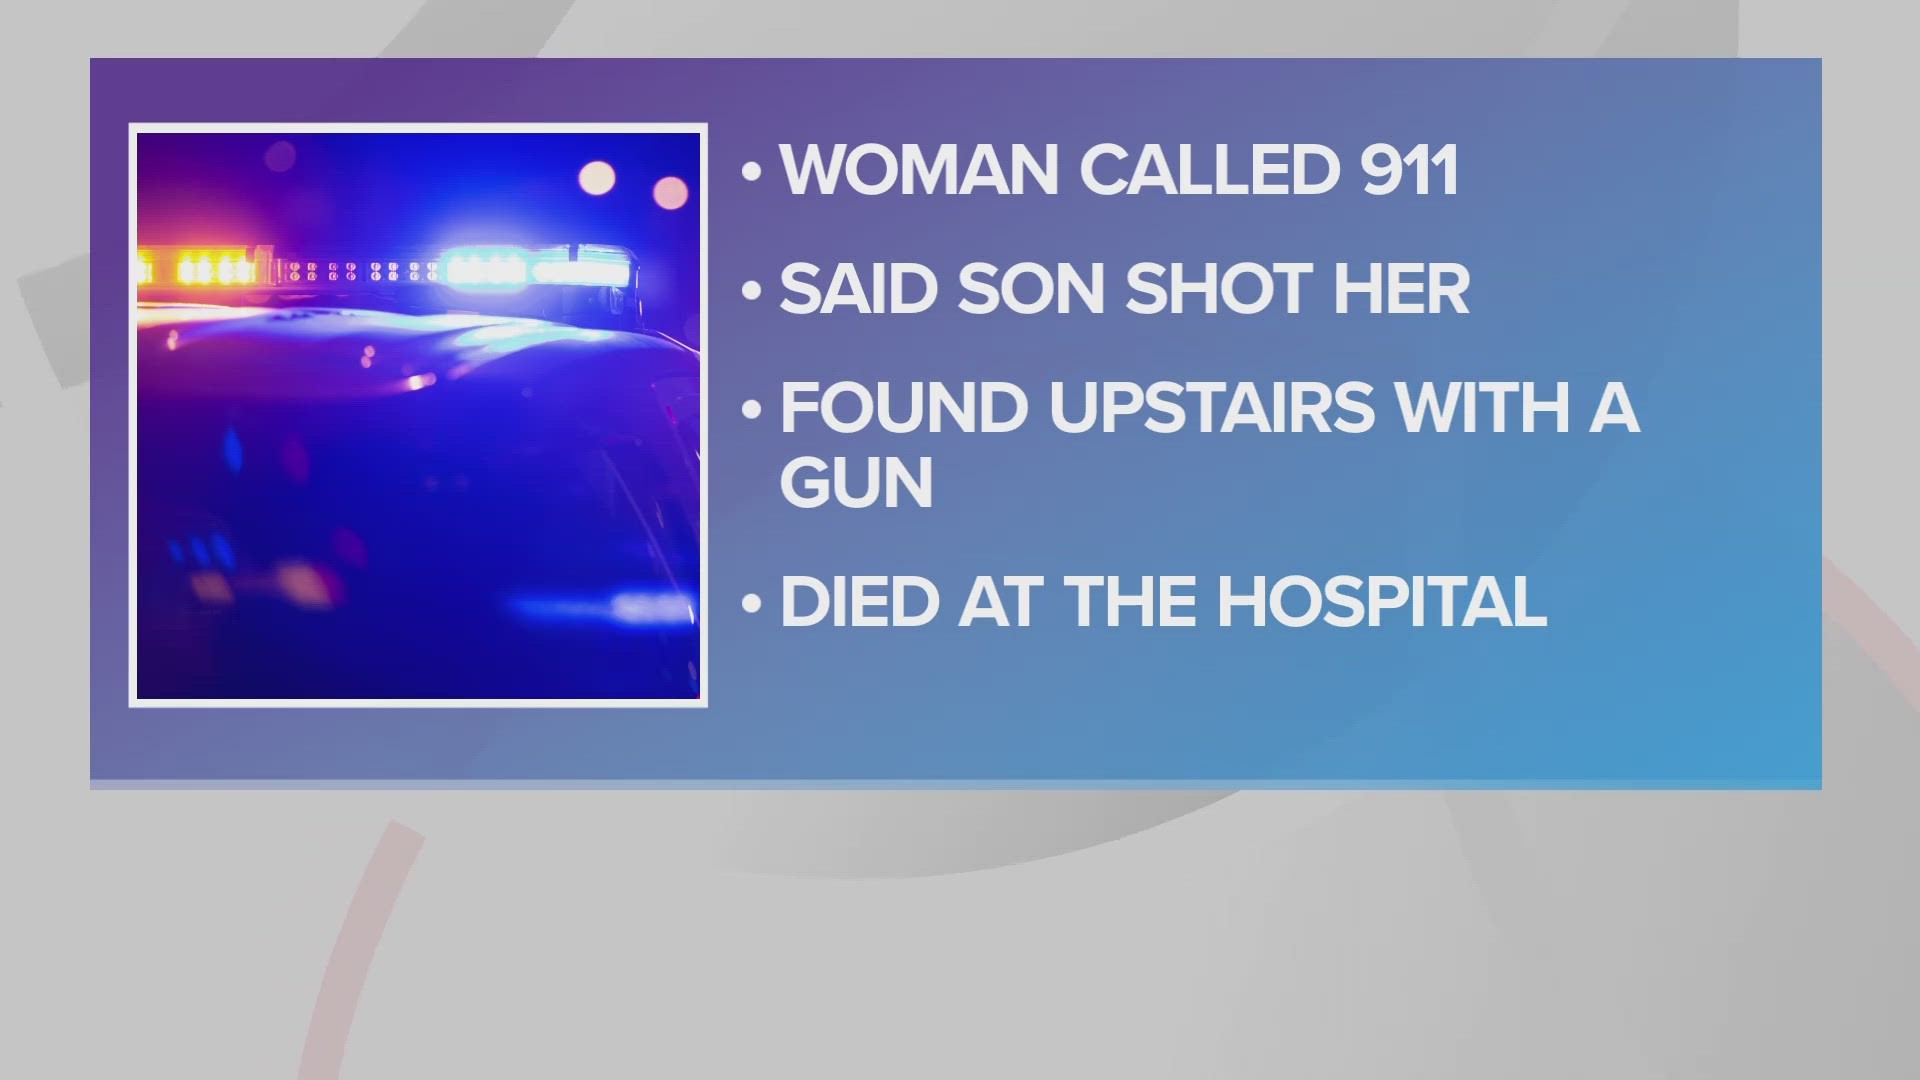 The victim called 911 and said her son had shot her, and she later died at the hospital.